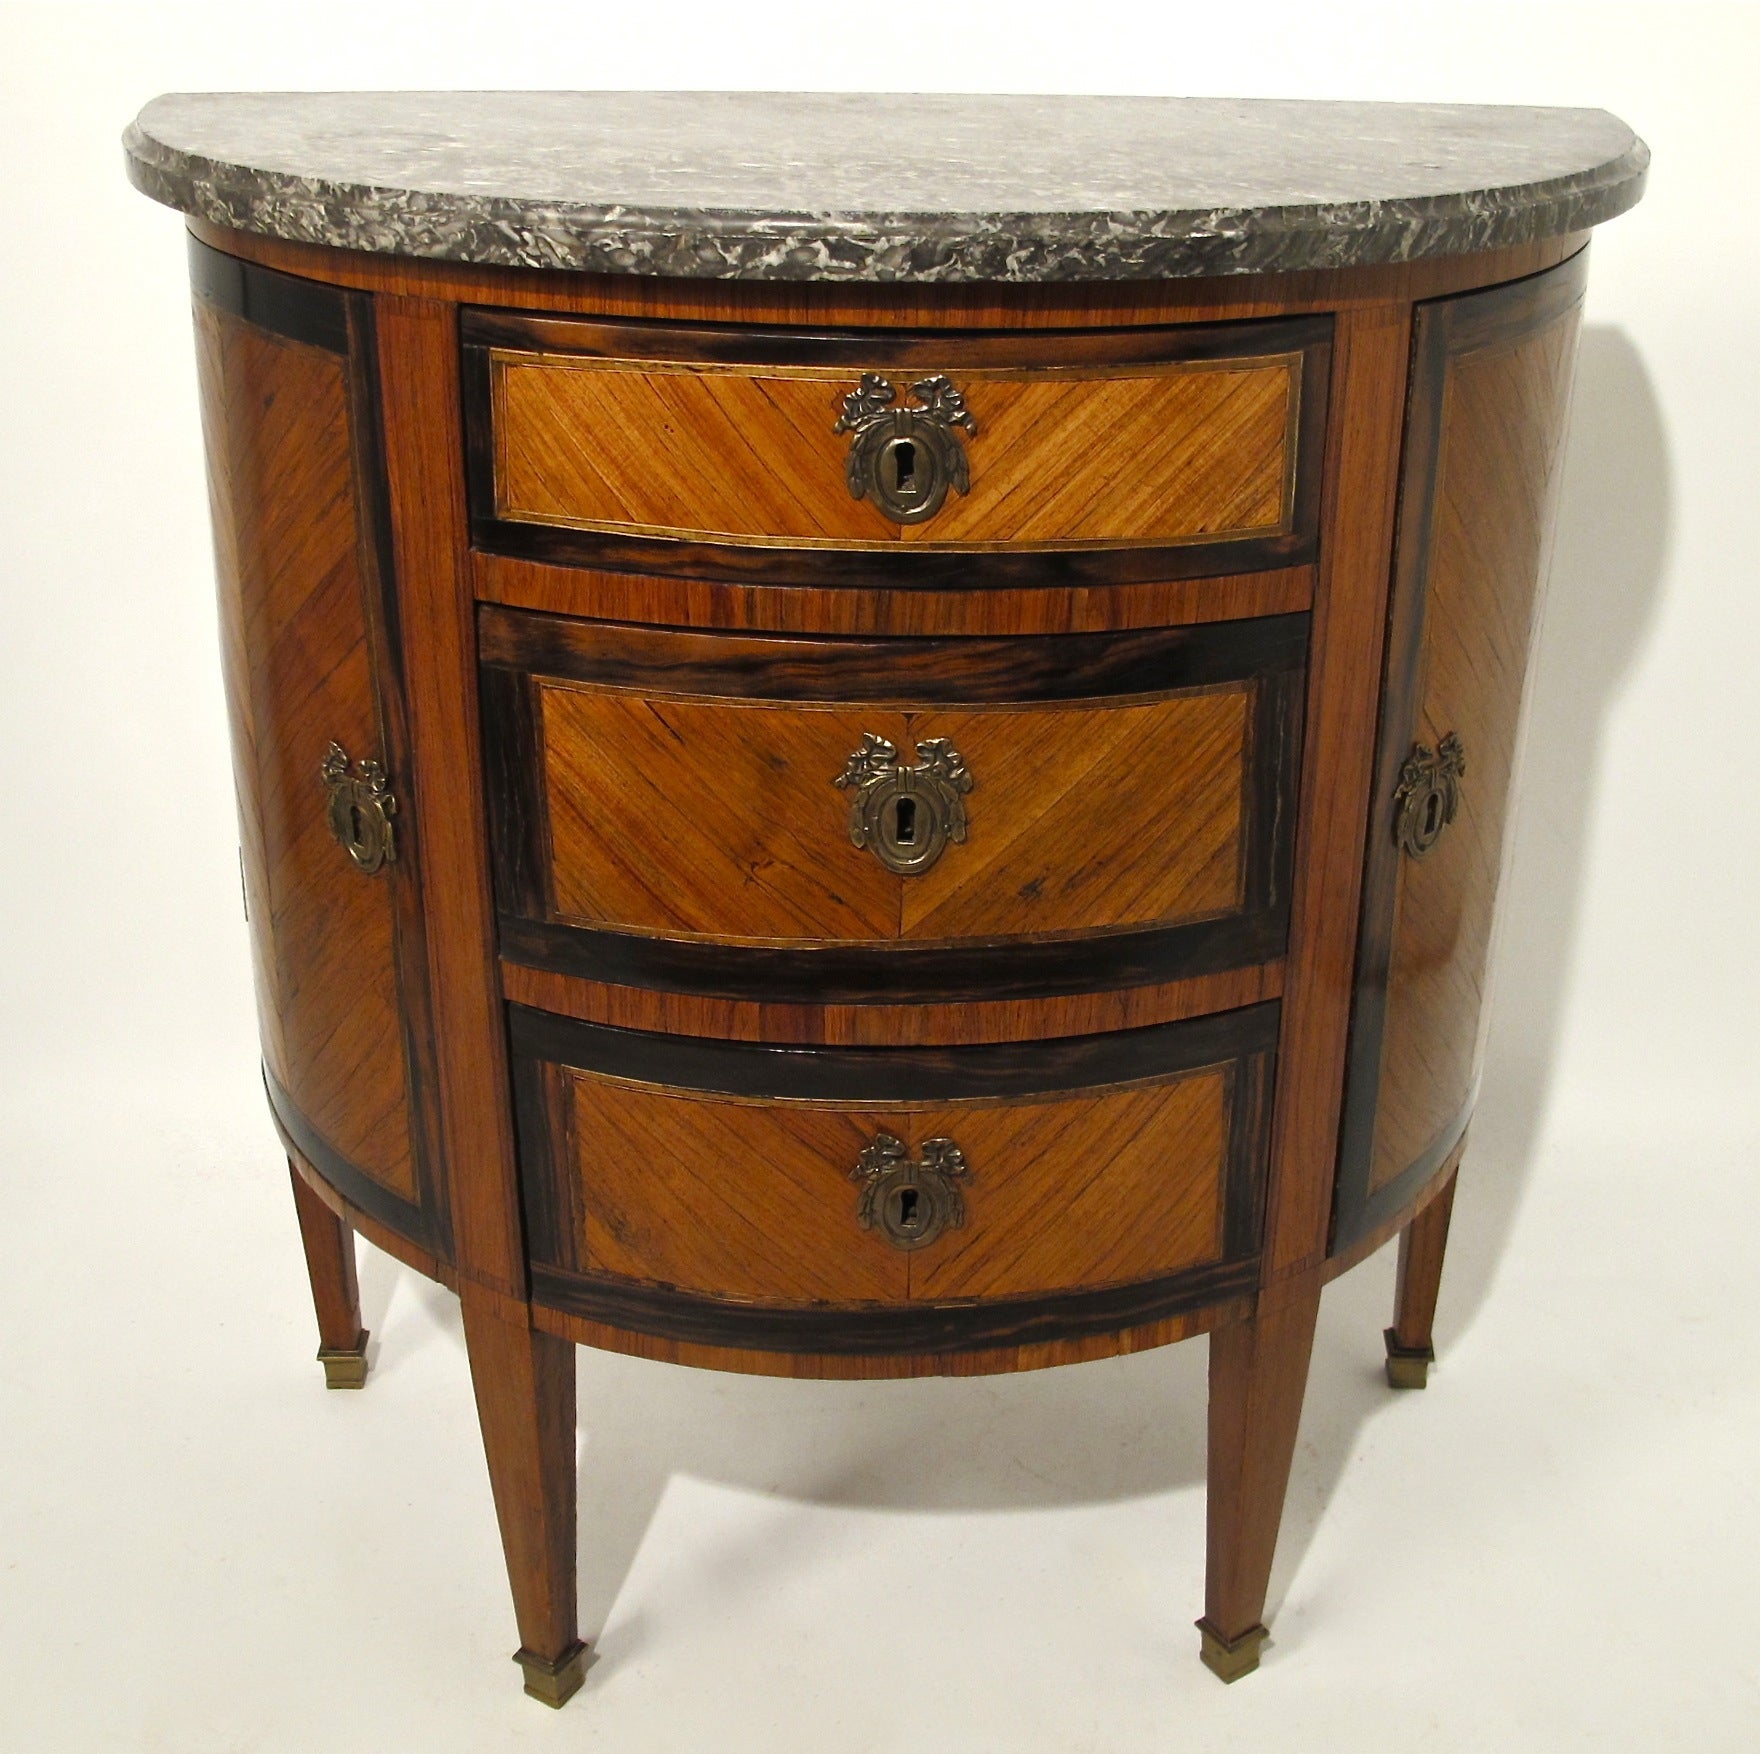 French Rosewood Demi Lune Parquetry Inlay Cabinet, 18th Century